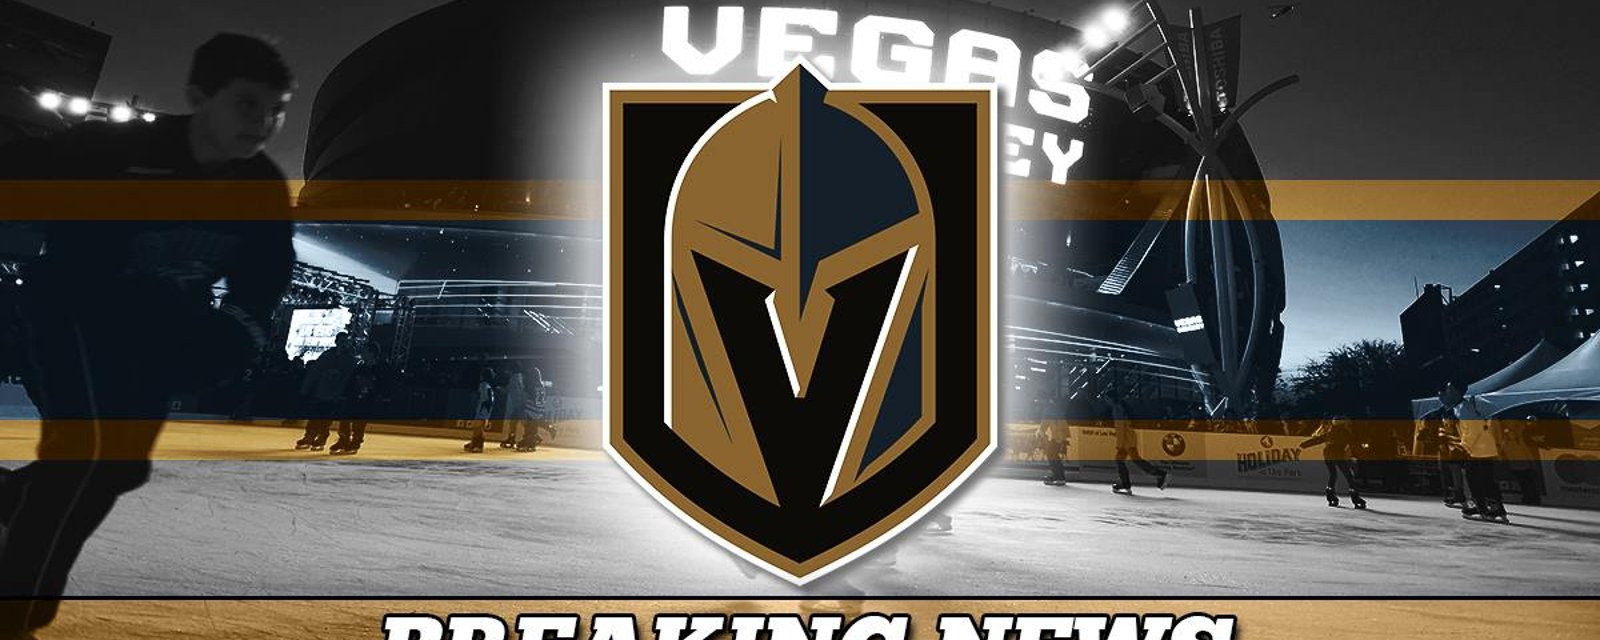 Breaking: The Golden Knights have signed a new player!